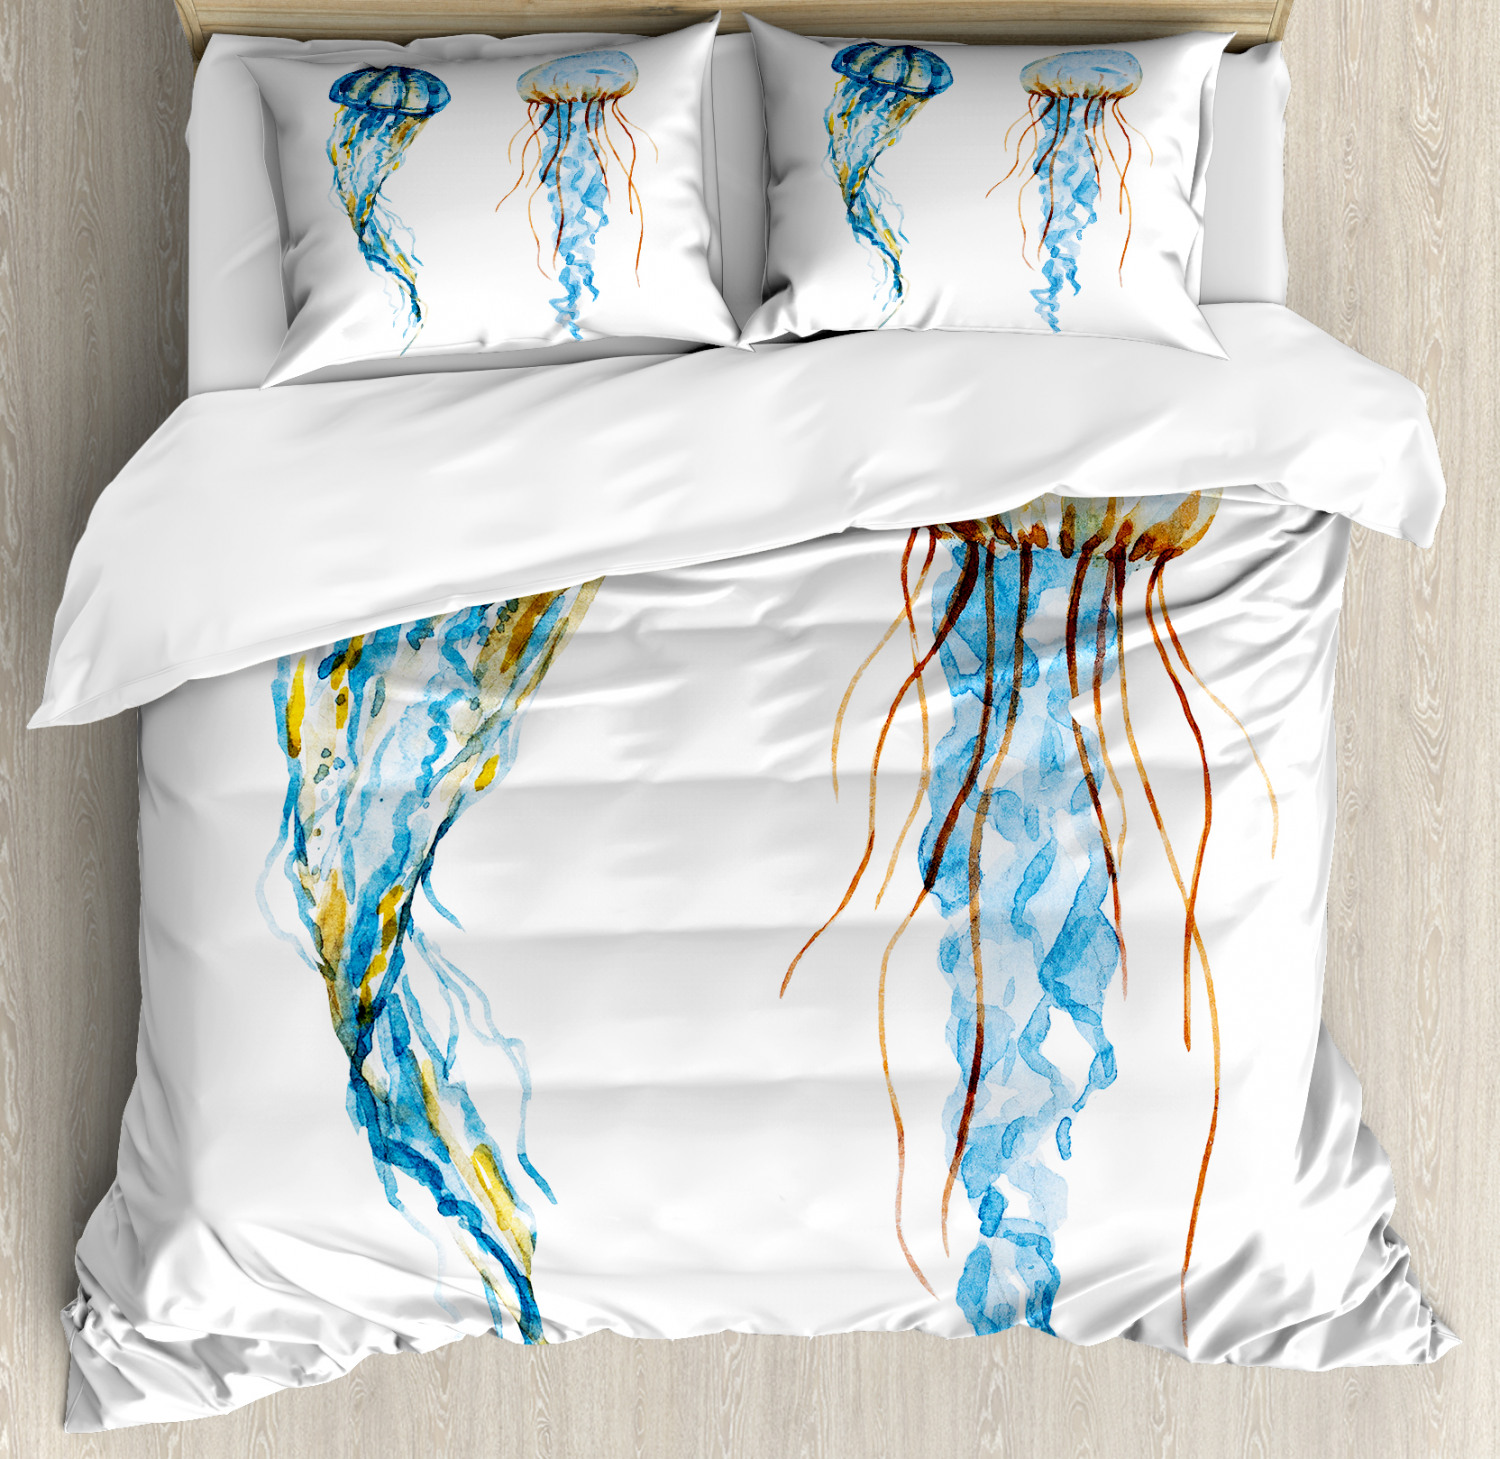 Nautical Duvet Cover Set With Pillow Shams Jellyfish Exotic Sea